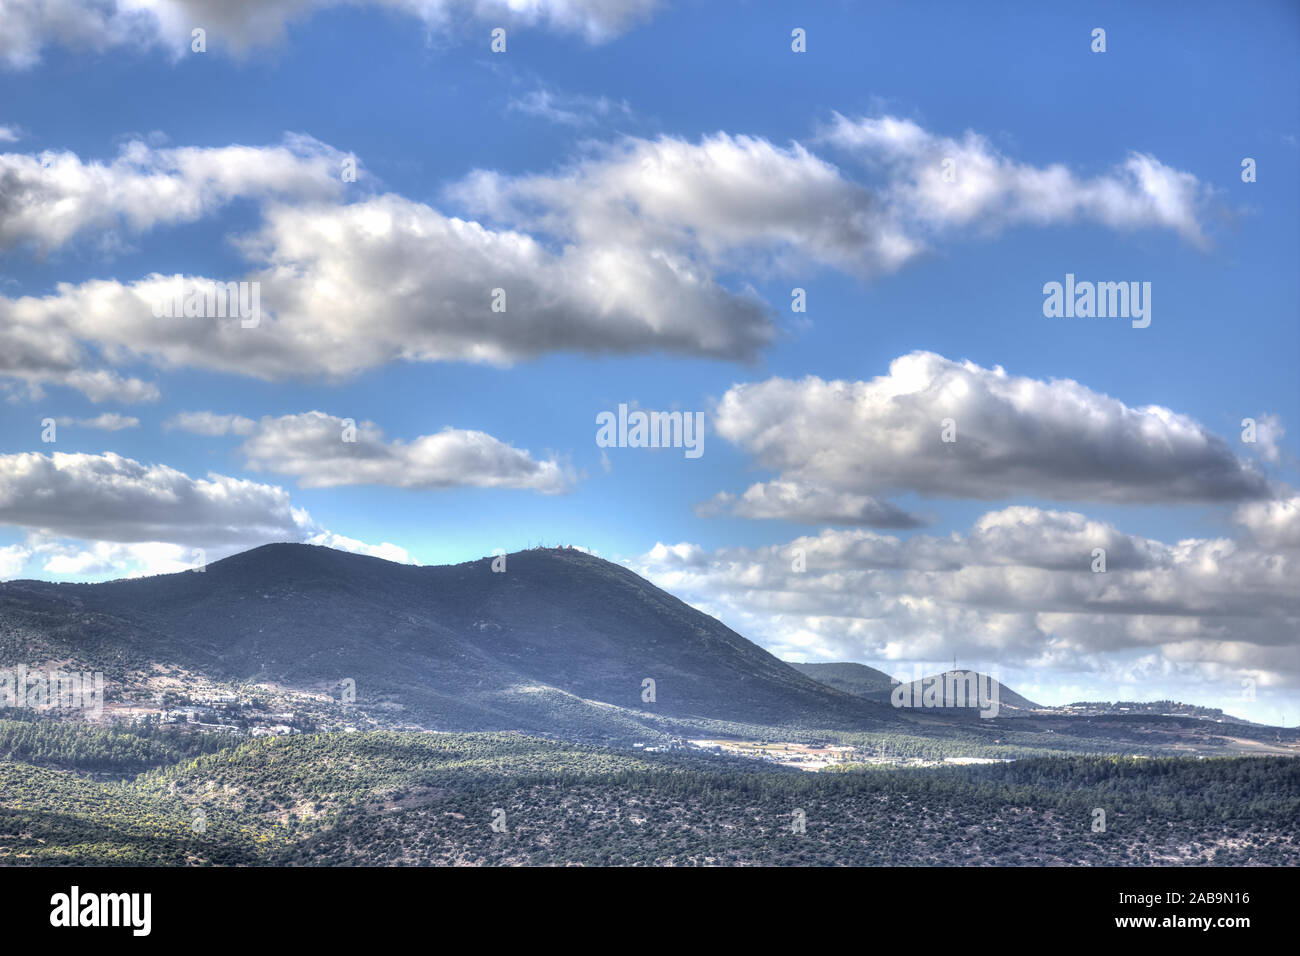 Closeup view of mount Meron from the Holy city of Safed Israel (tzfat) Stock Photo